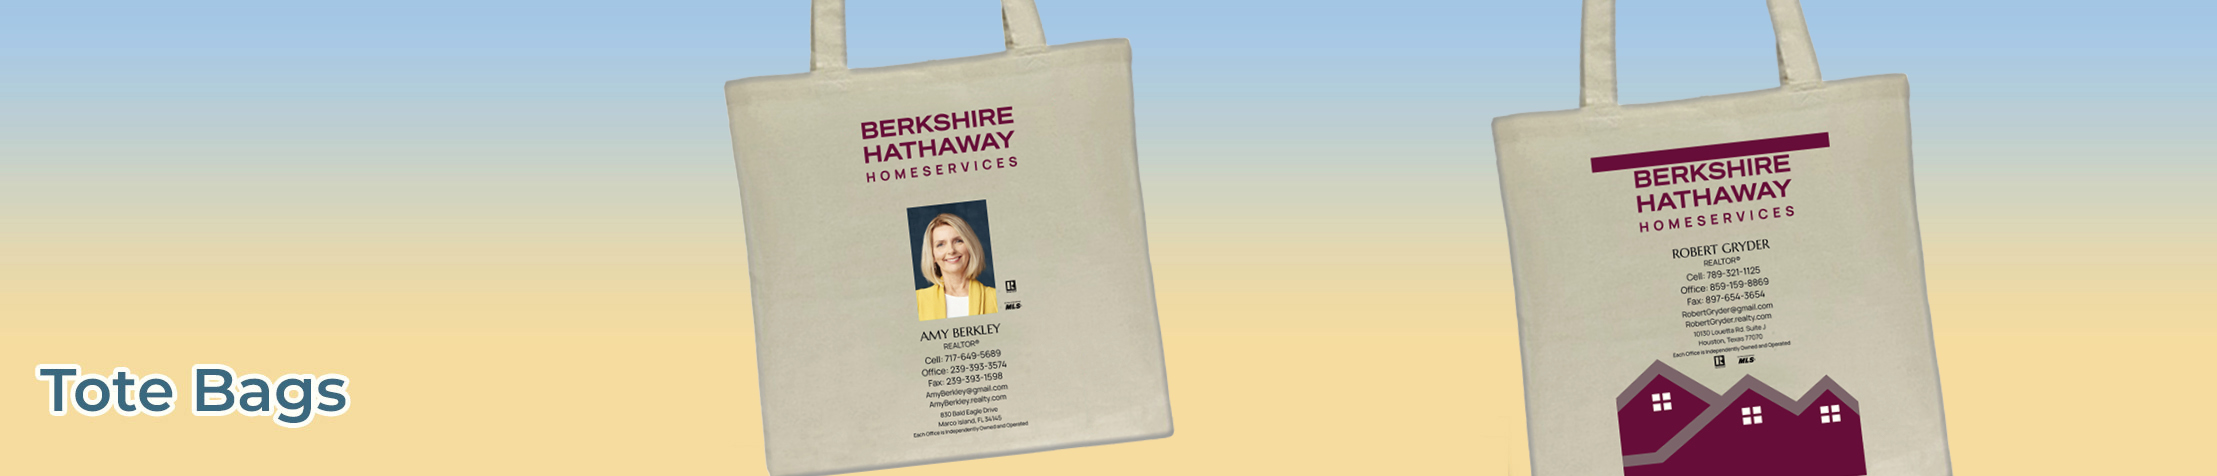 Berkshire Hathaway Real Estate Tote bags - Berkshire Hathaway  personalized realtor promotional products | BestPrintBuy.com